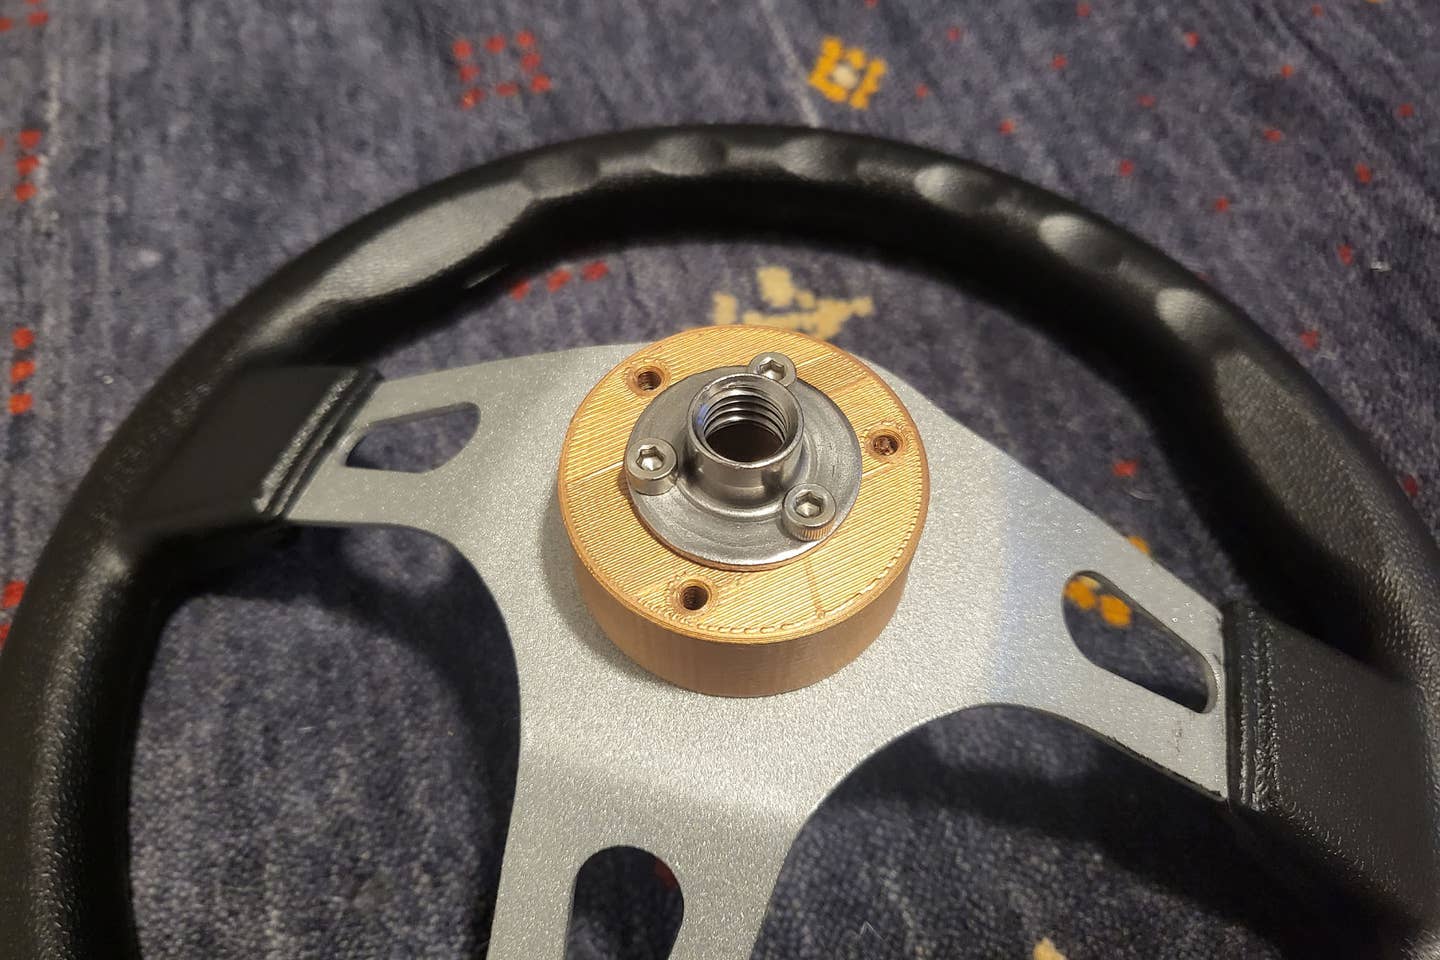 The only 3D-printed part of the kart is the steering adapter, which allows the wheel to bolt up to the smaller screw-mount nuts I used for most of the steering.